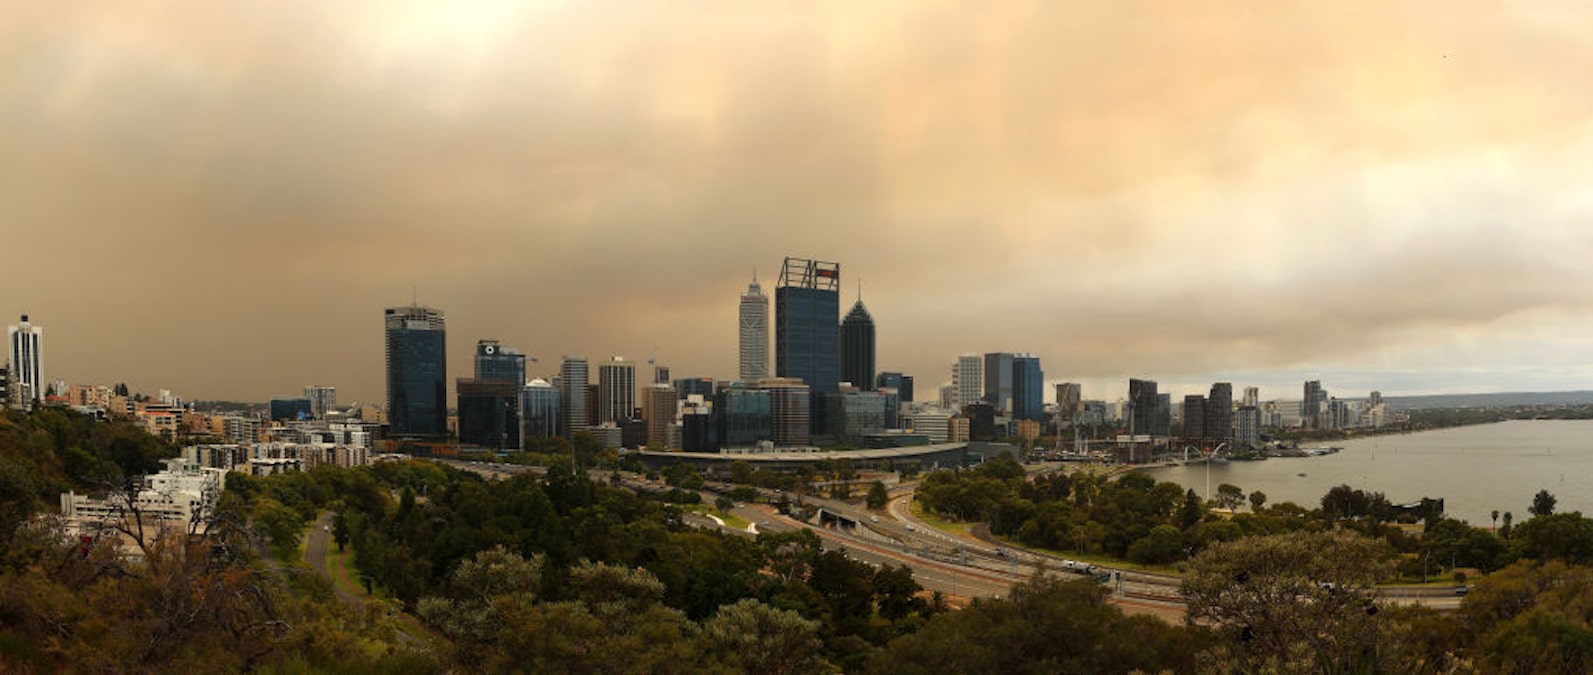 Australia’s ‘Black Summer’ Fires Depleted the Ozone Layer